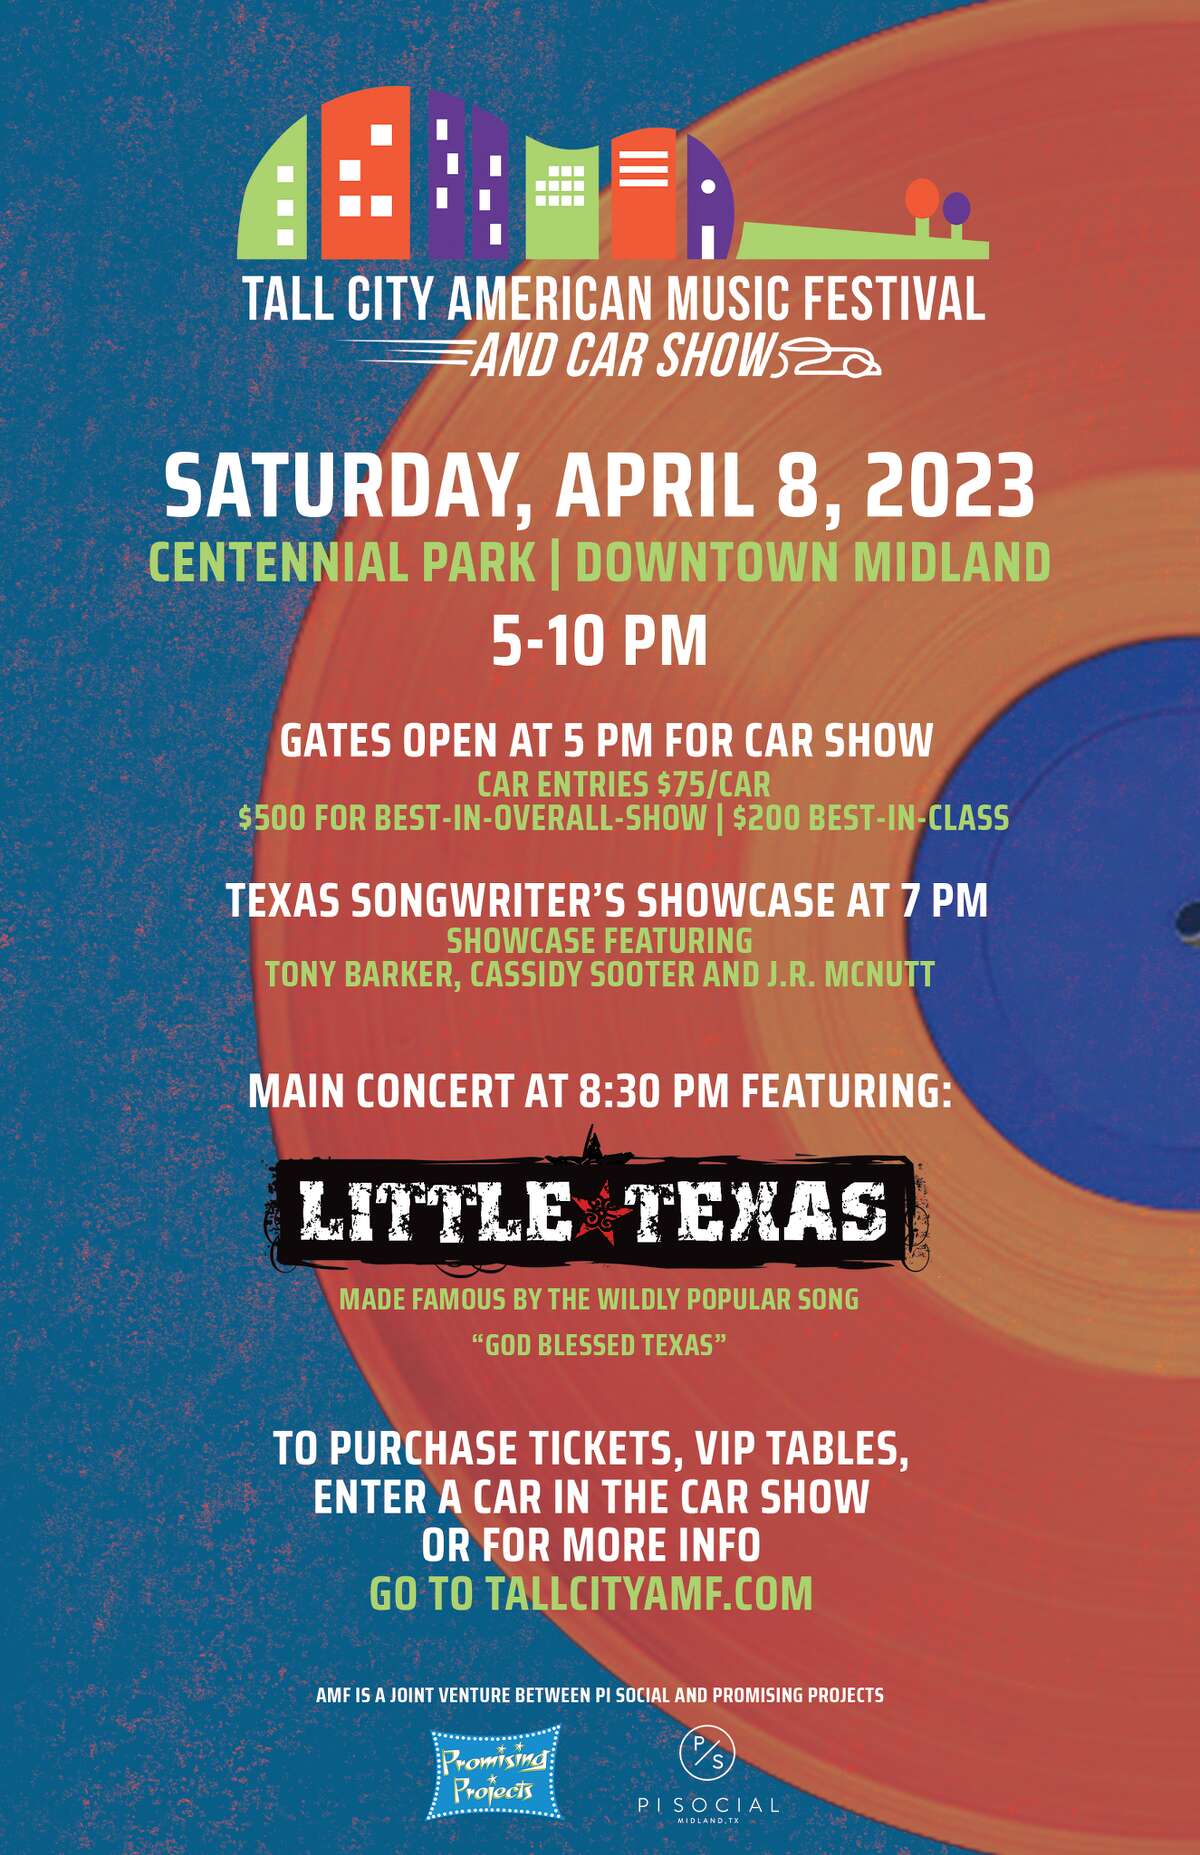 Tall City American Music Festival and Car Show